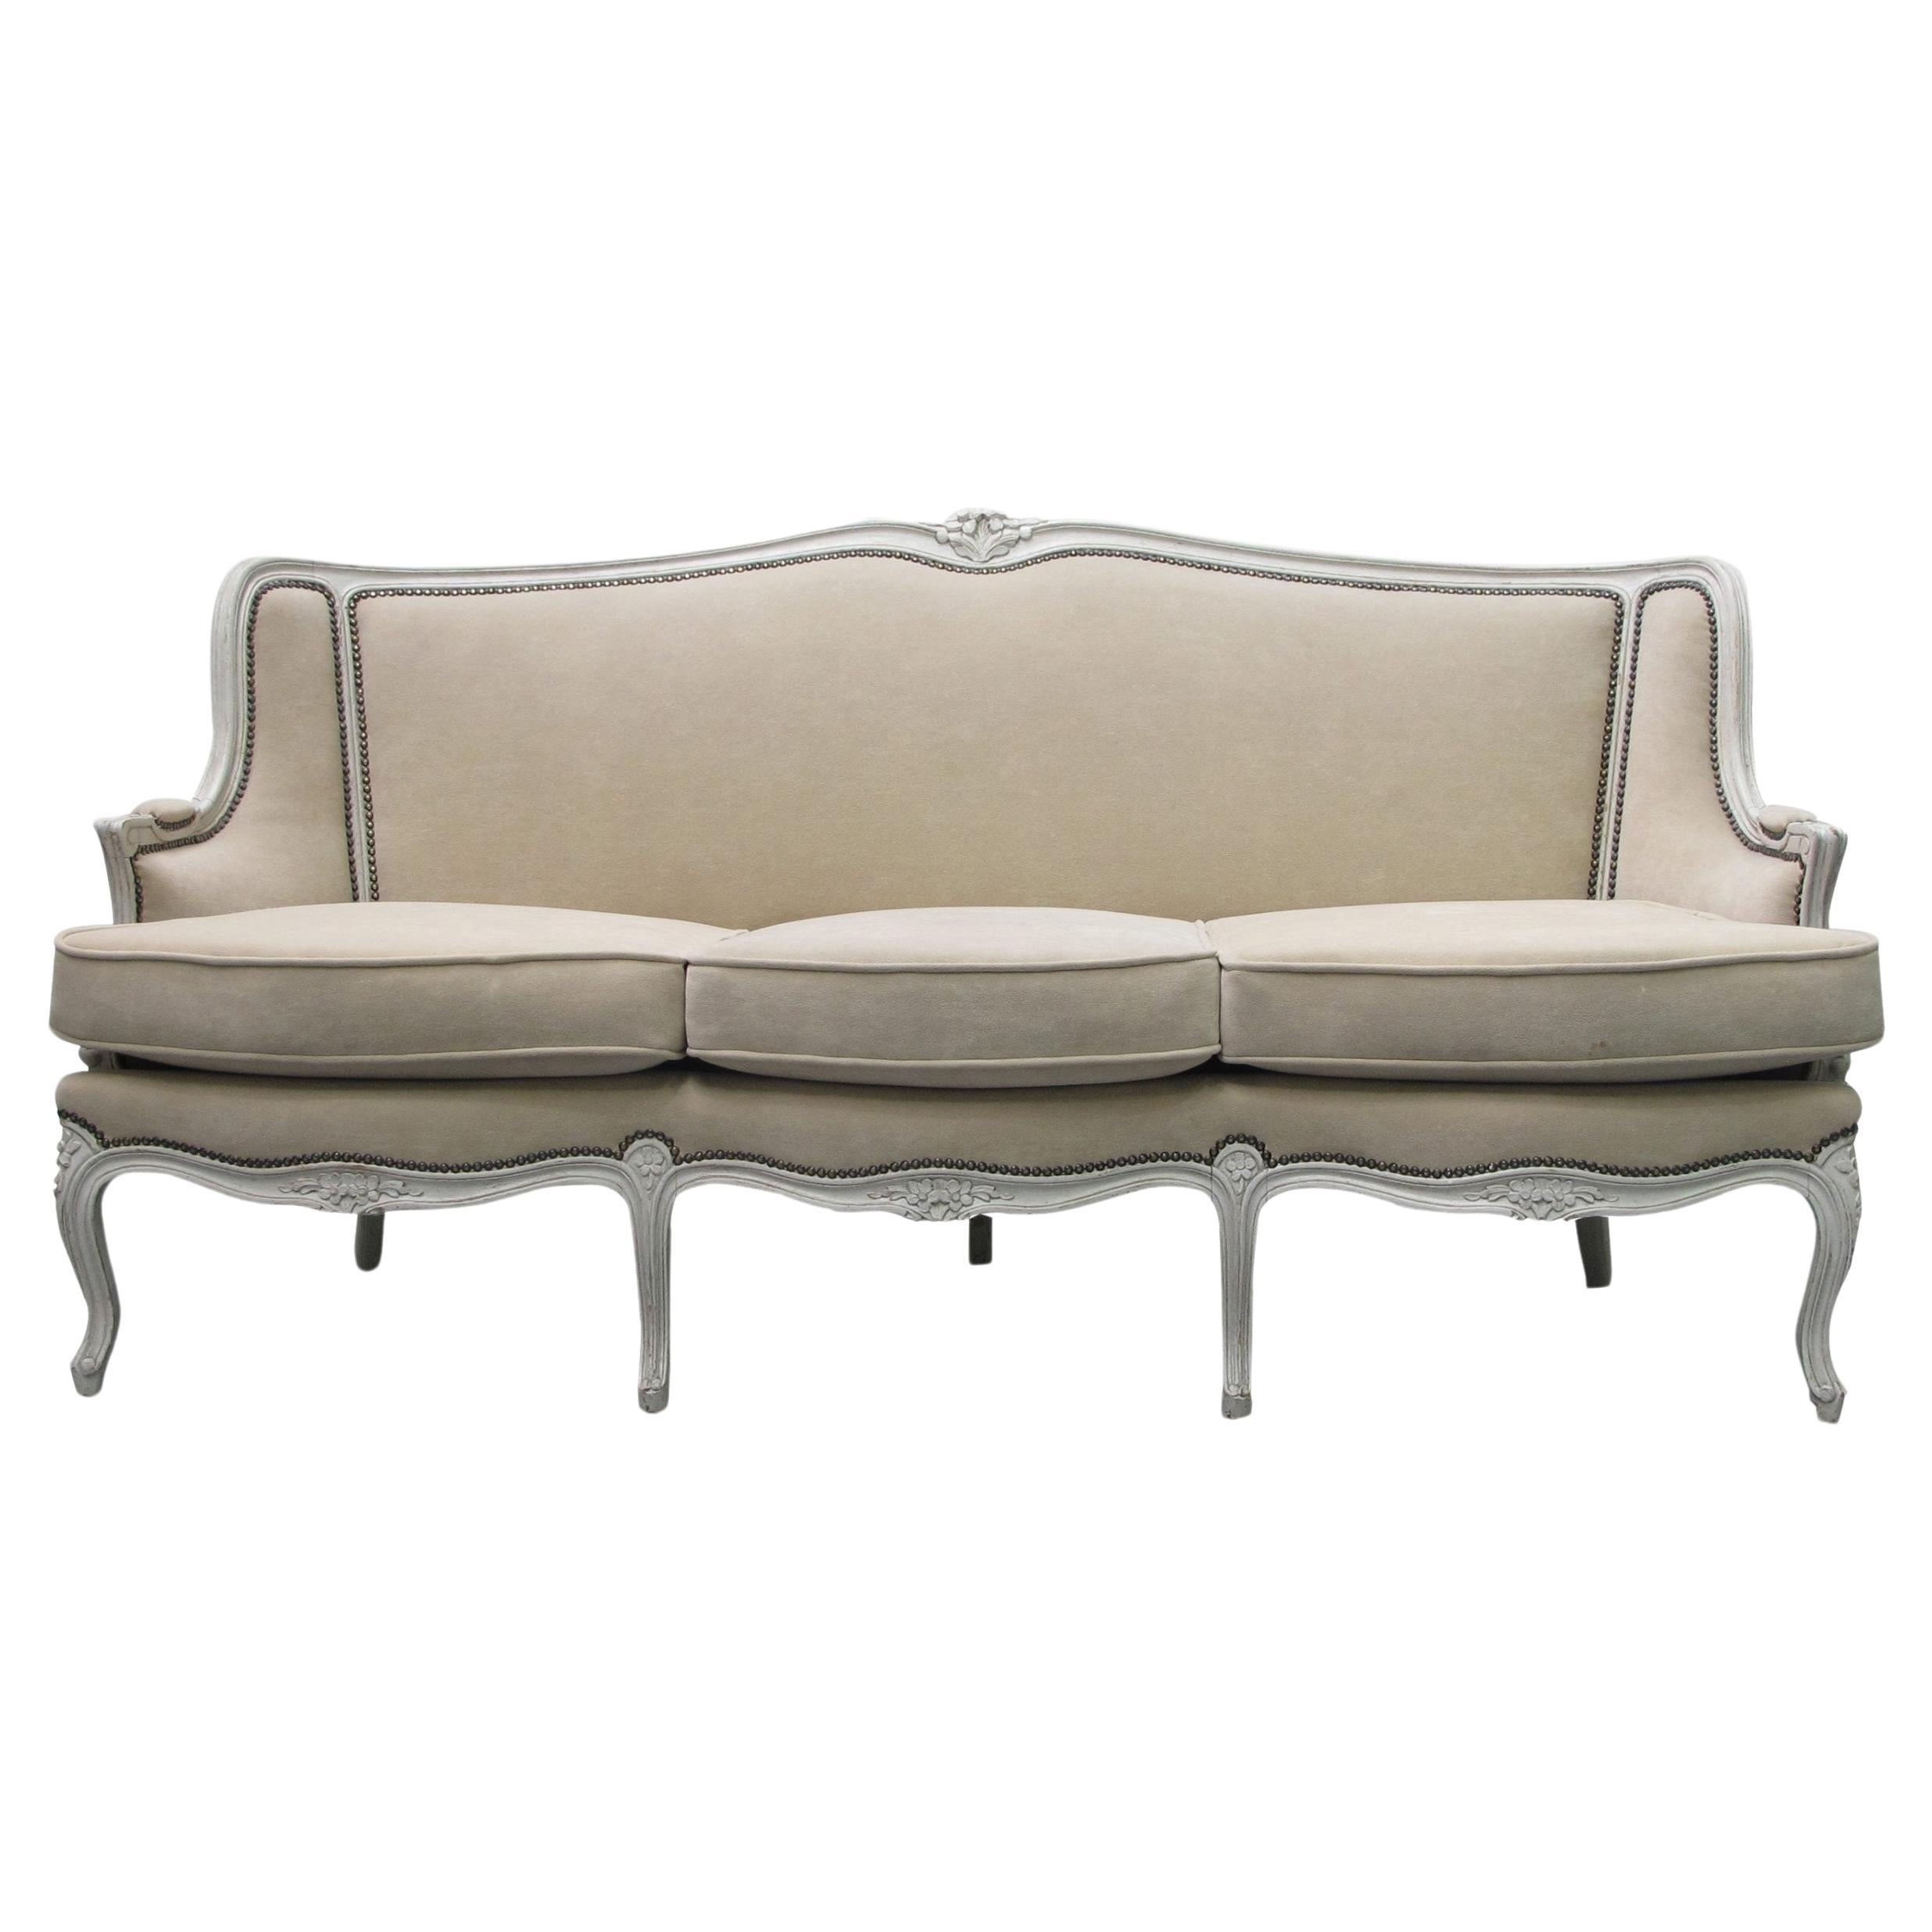 Early 20th Century French Three Seater Sofa, Louis XV Style With Painted Frame